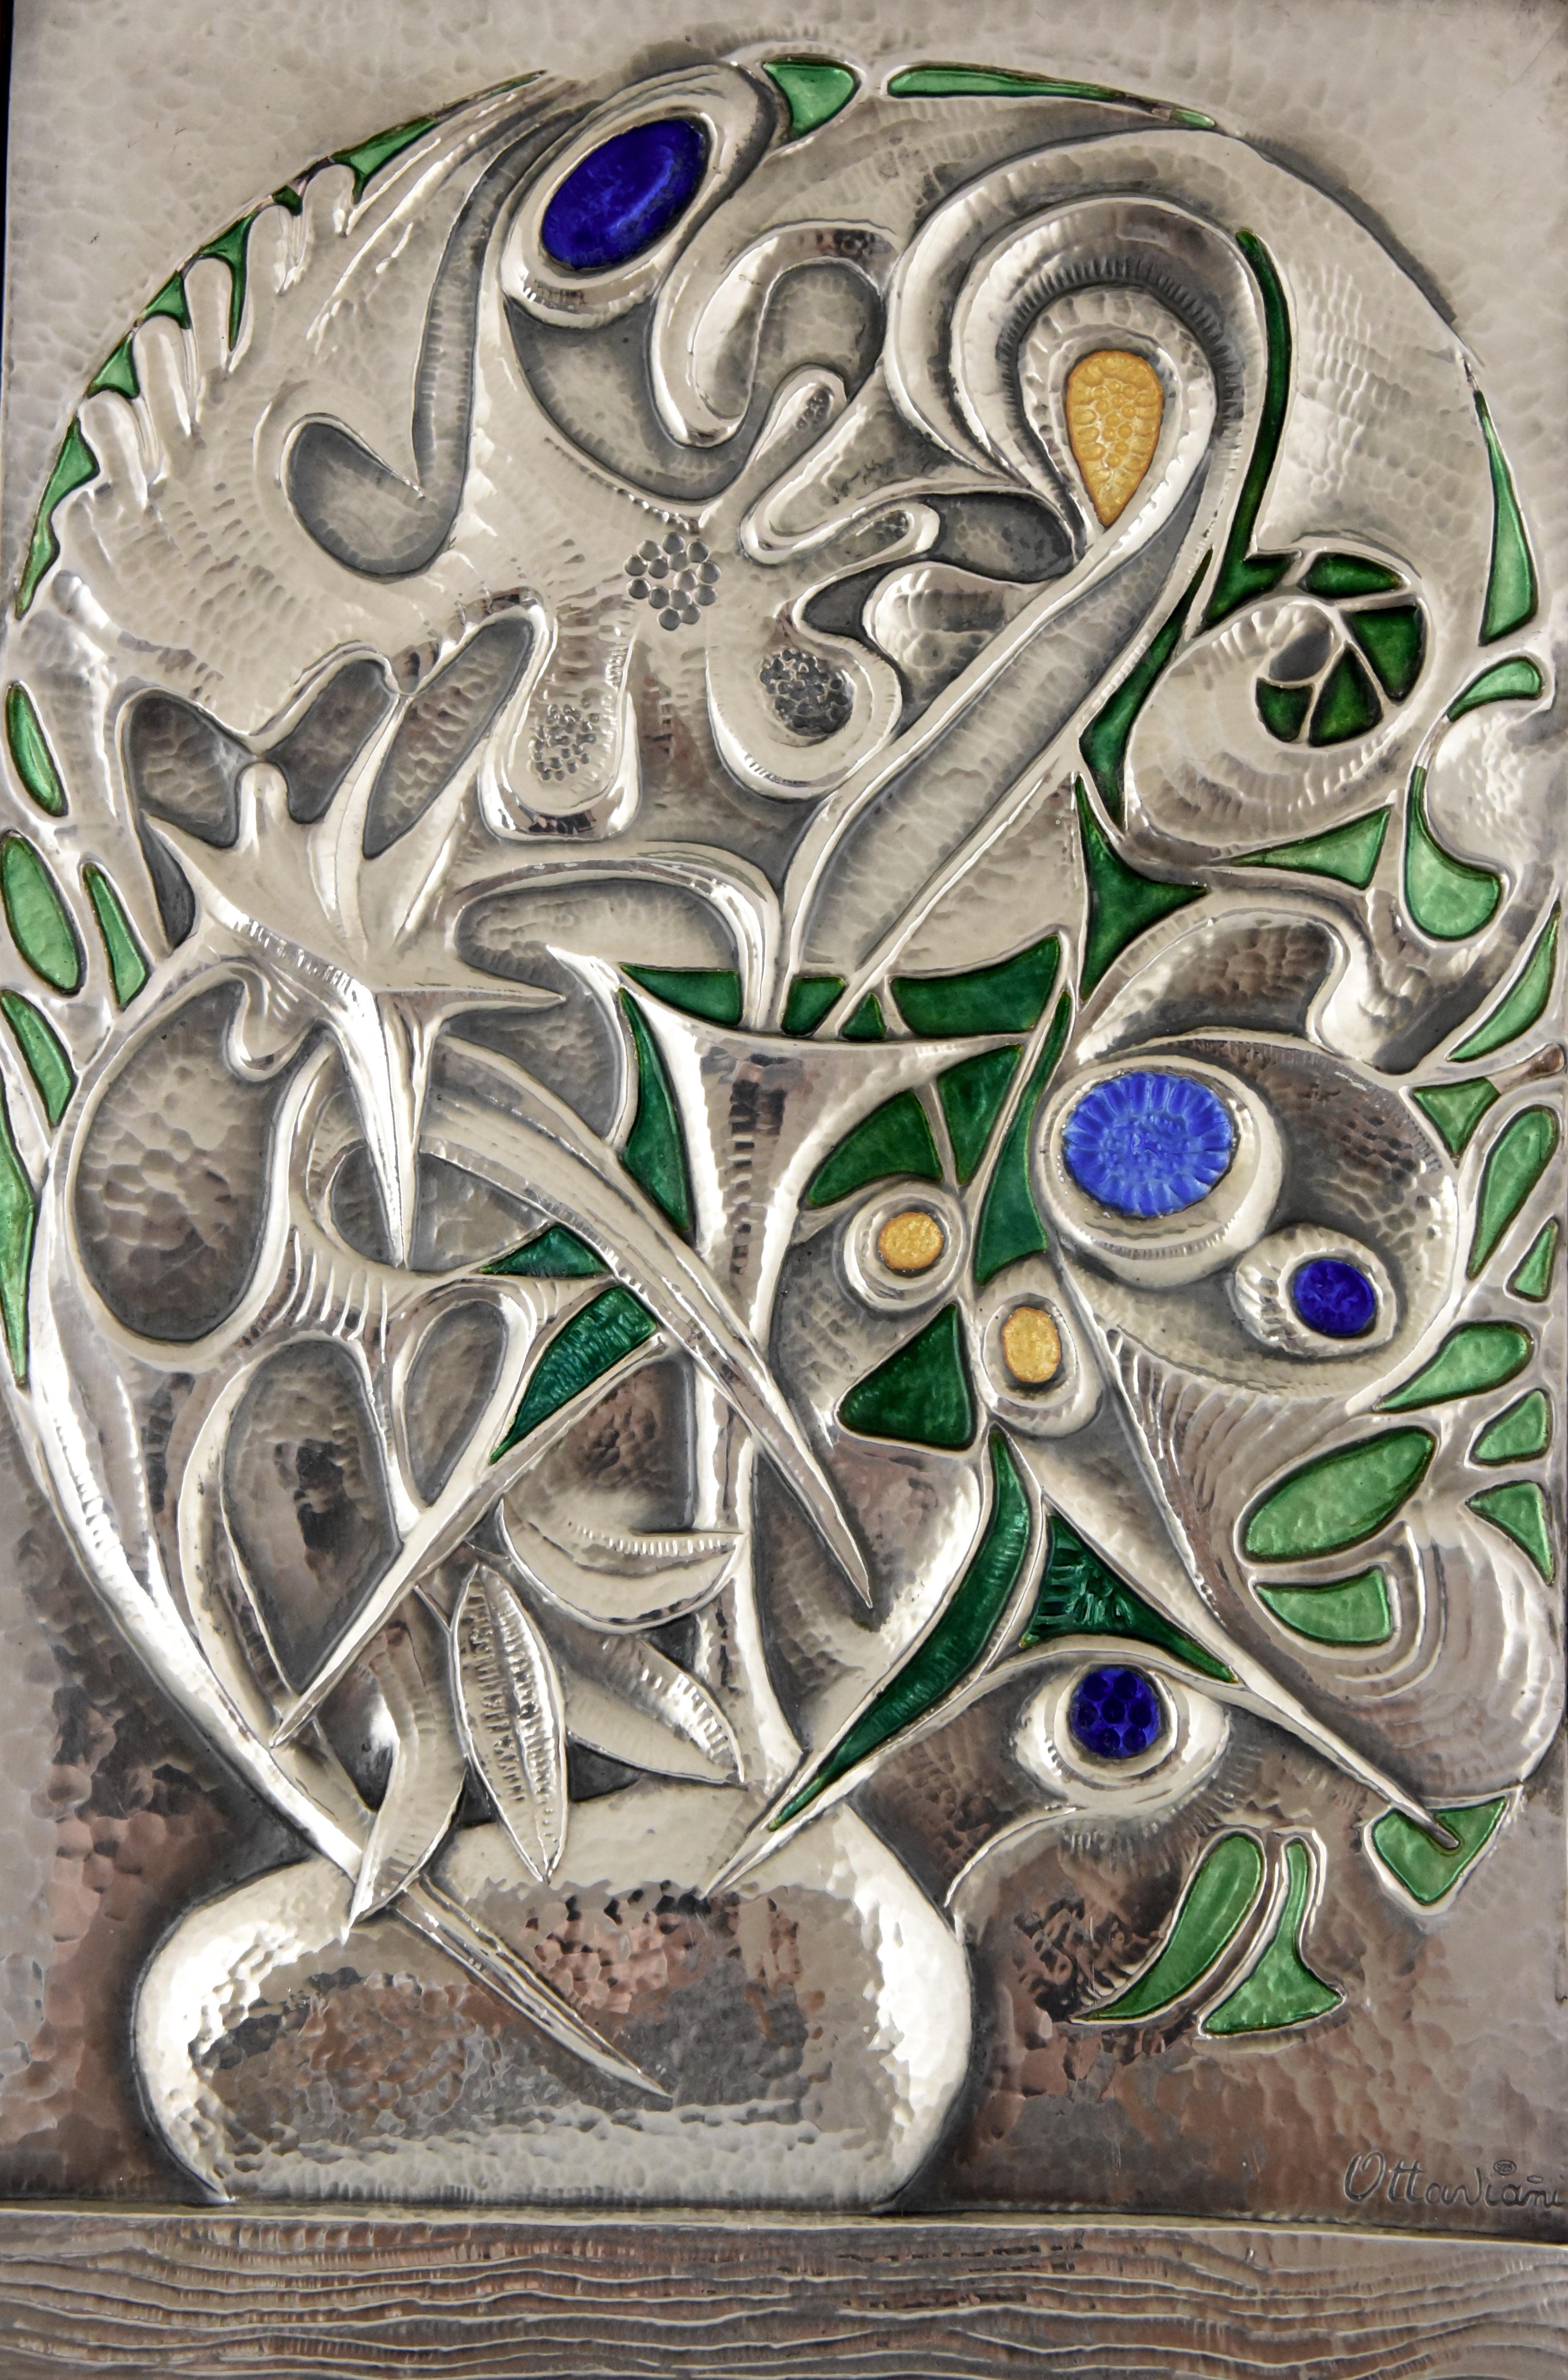 Fine Mid-Century Modern enameled sterling silver wall decoration by the Italian artist Ottaviani picturing a flower vase, in the original wooden frame, ca. 1960.
Signed and with hallmark.
About:
Ottaviani (1945) is a jewelry and silver firm